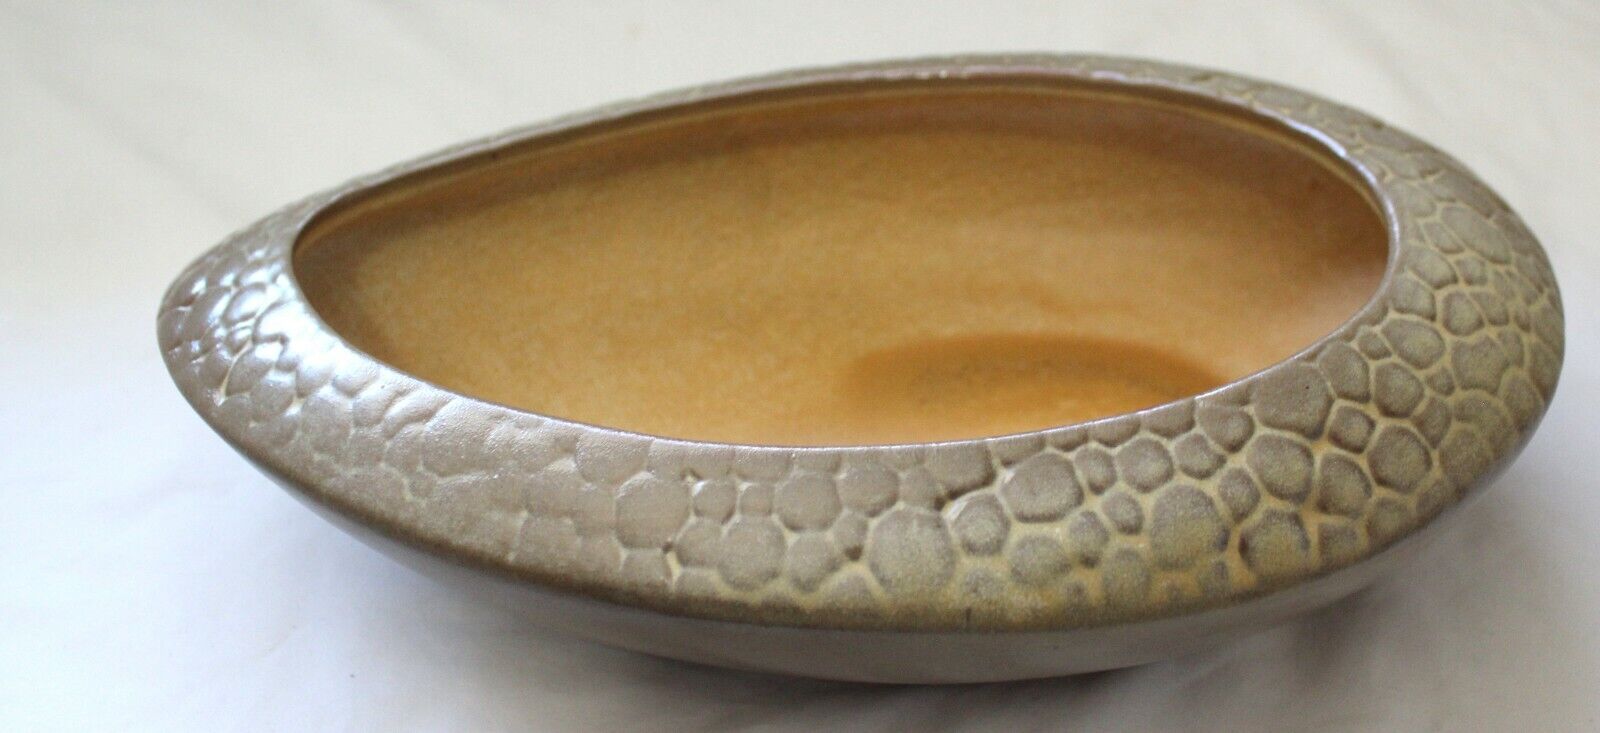 VINTAGE FRANKOMA 231A DESERT GOLD OVAL TEXTURED CROC CLAY POTTERY PLANTER BOWL